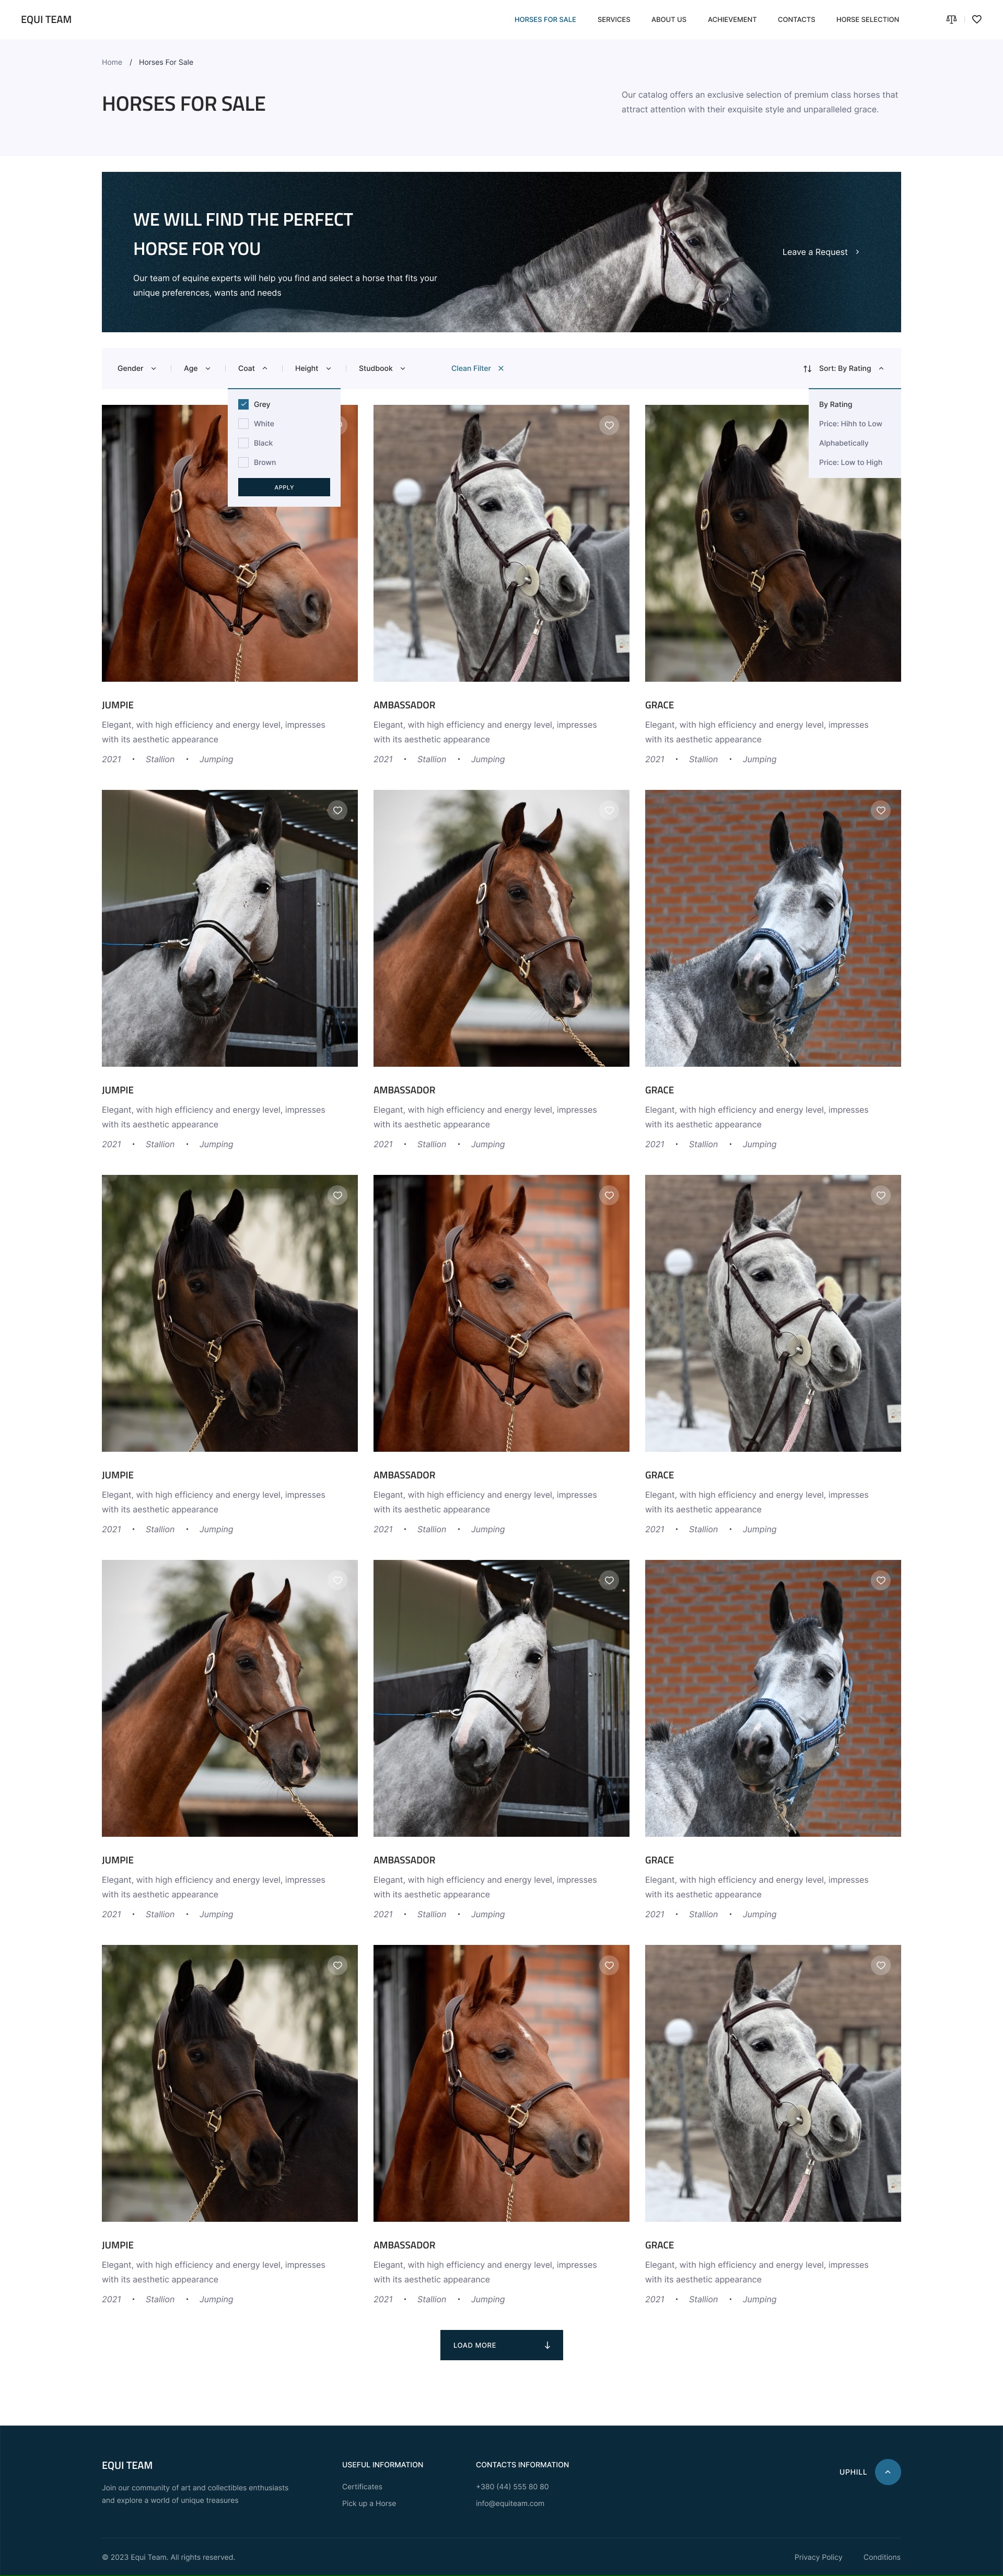 Equi Team_2.0_Horse_For_Sale_1.0-sq